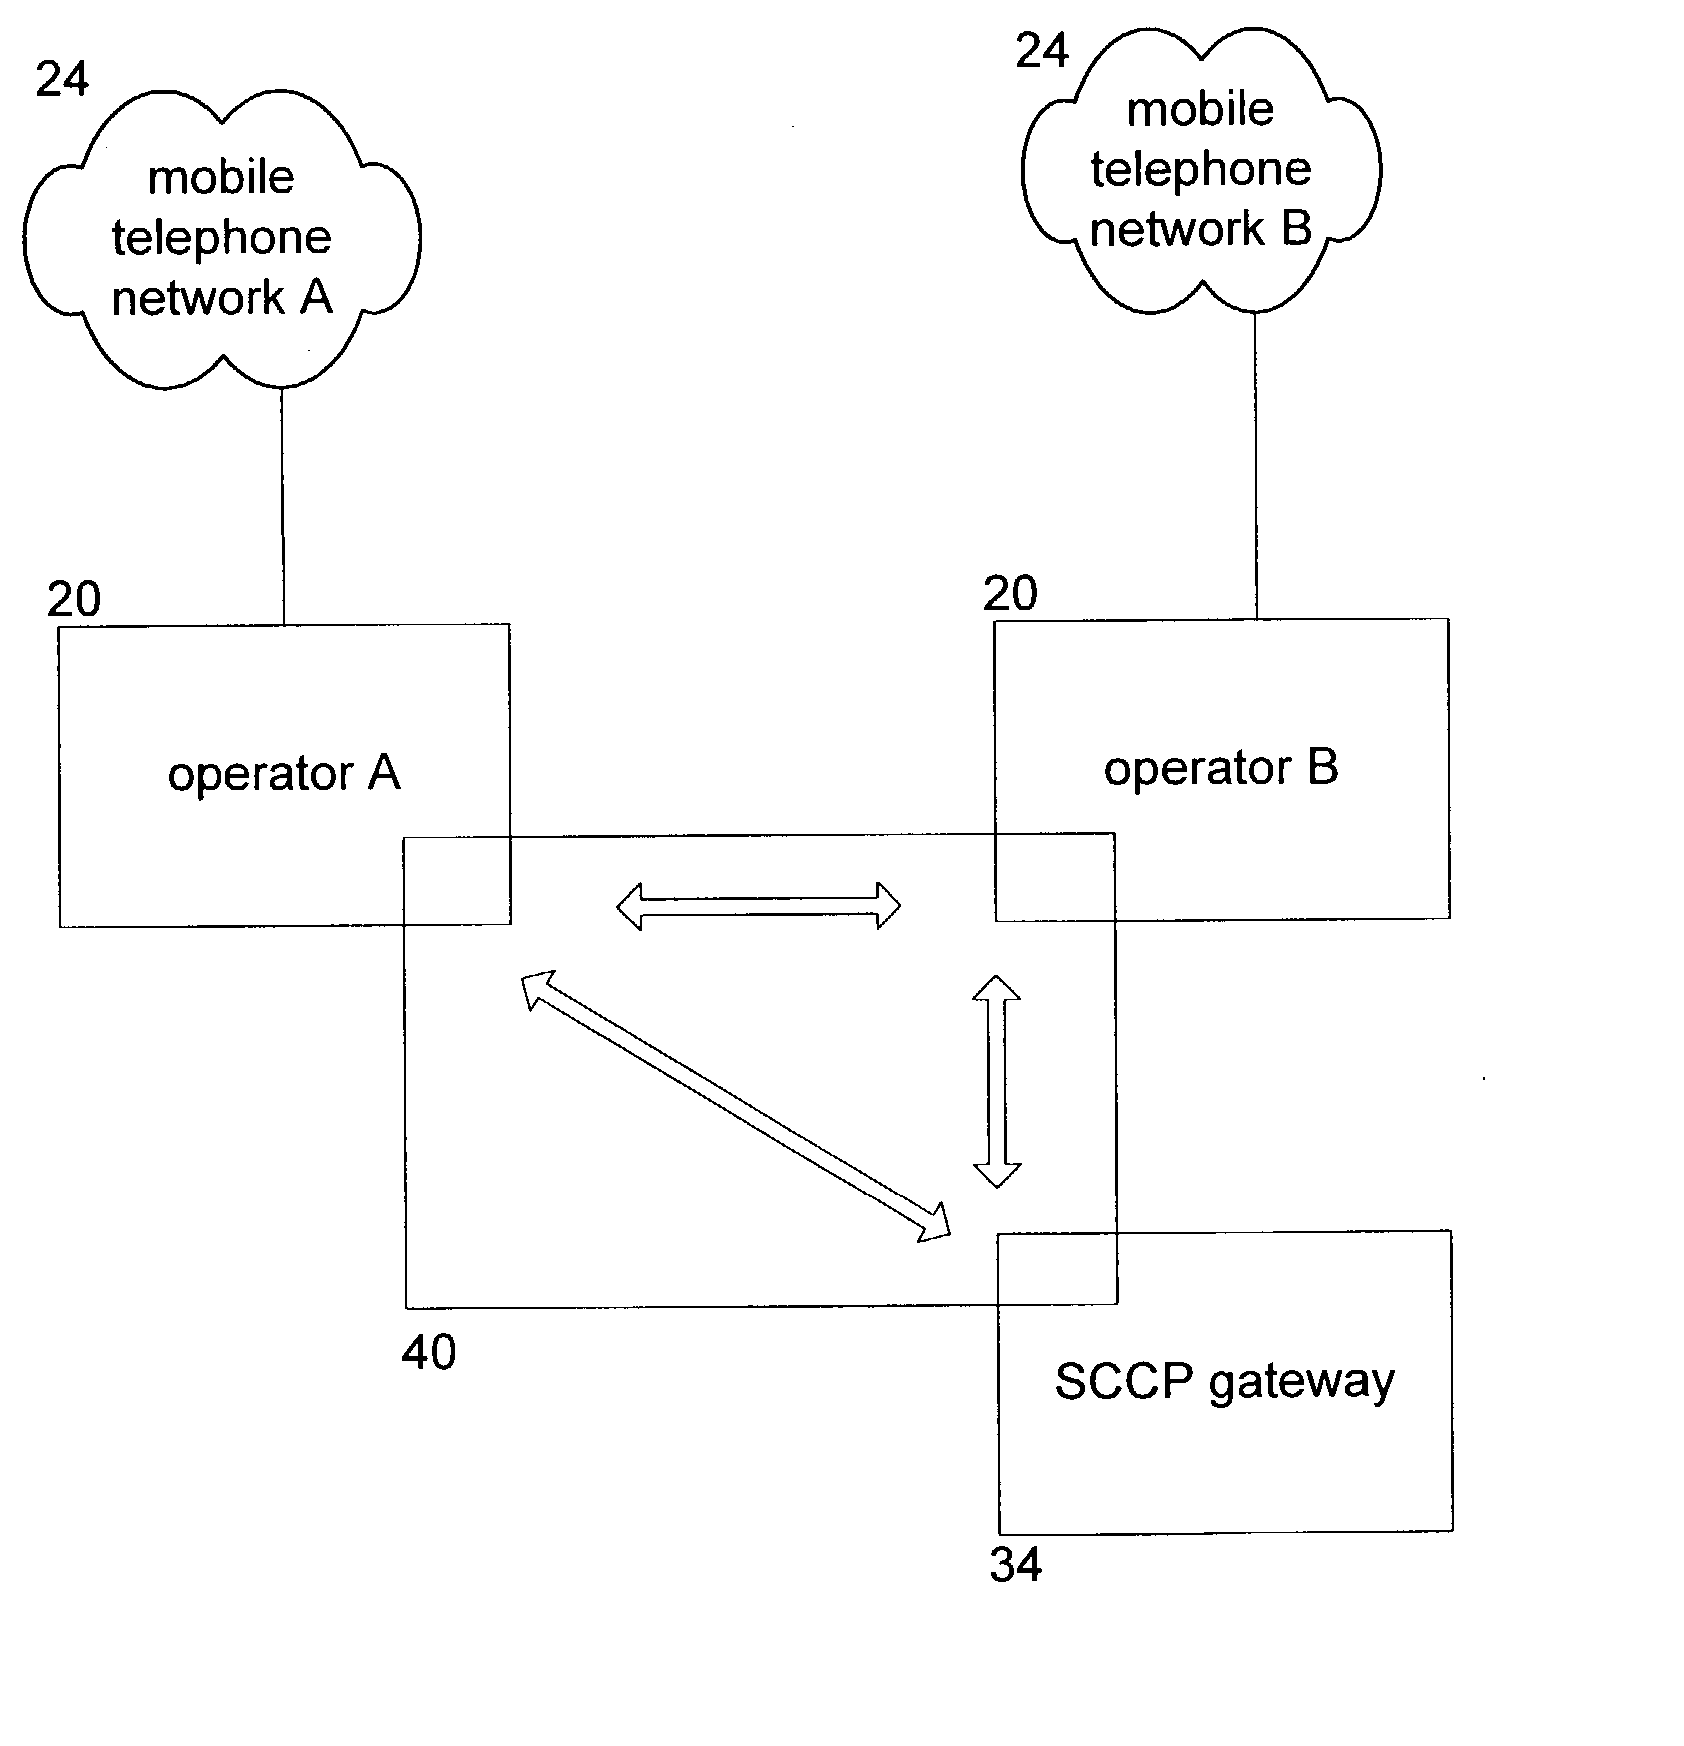 System and method for managing parameter exchange between telecommunications operators